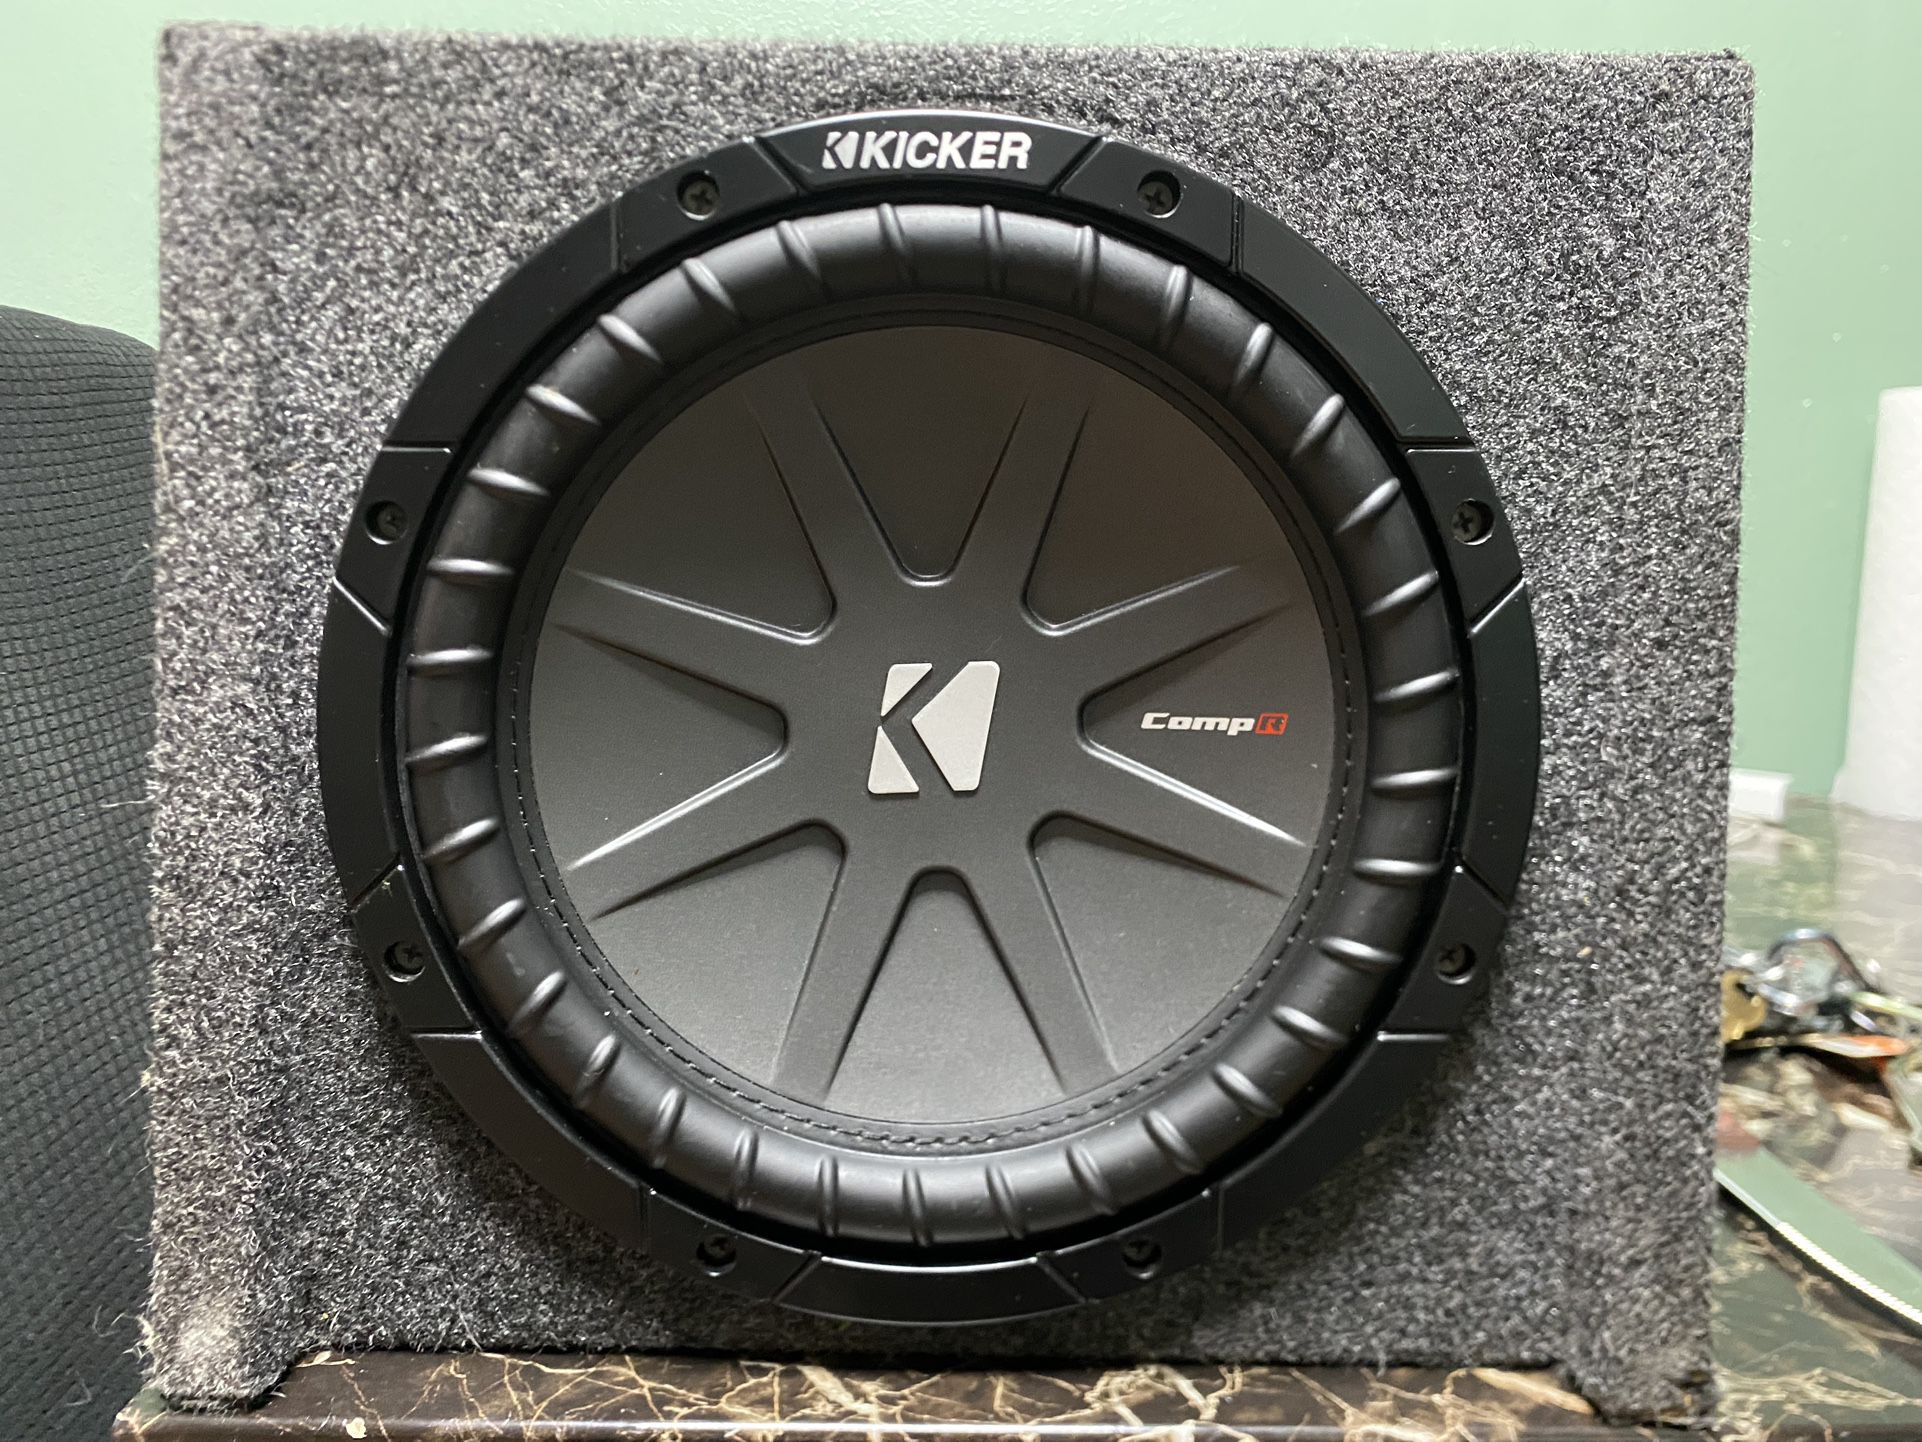 10" Kicker Comp R subwoofer in box $85